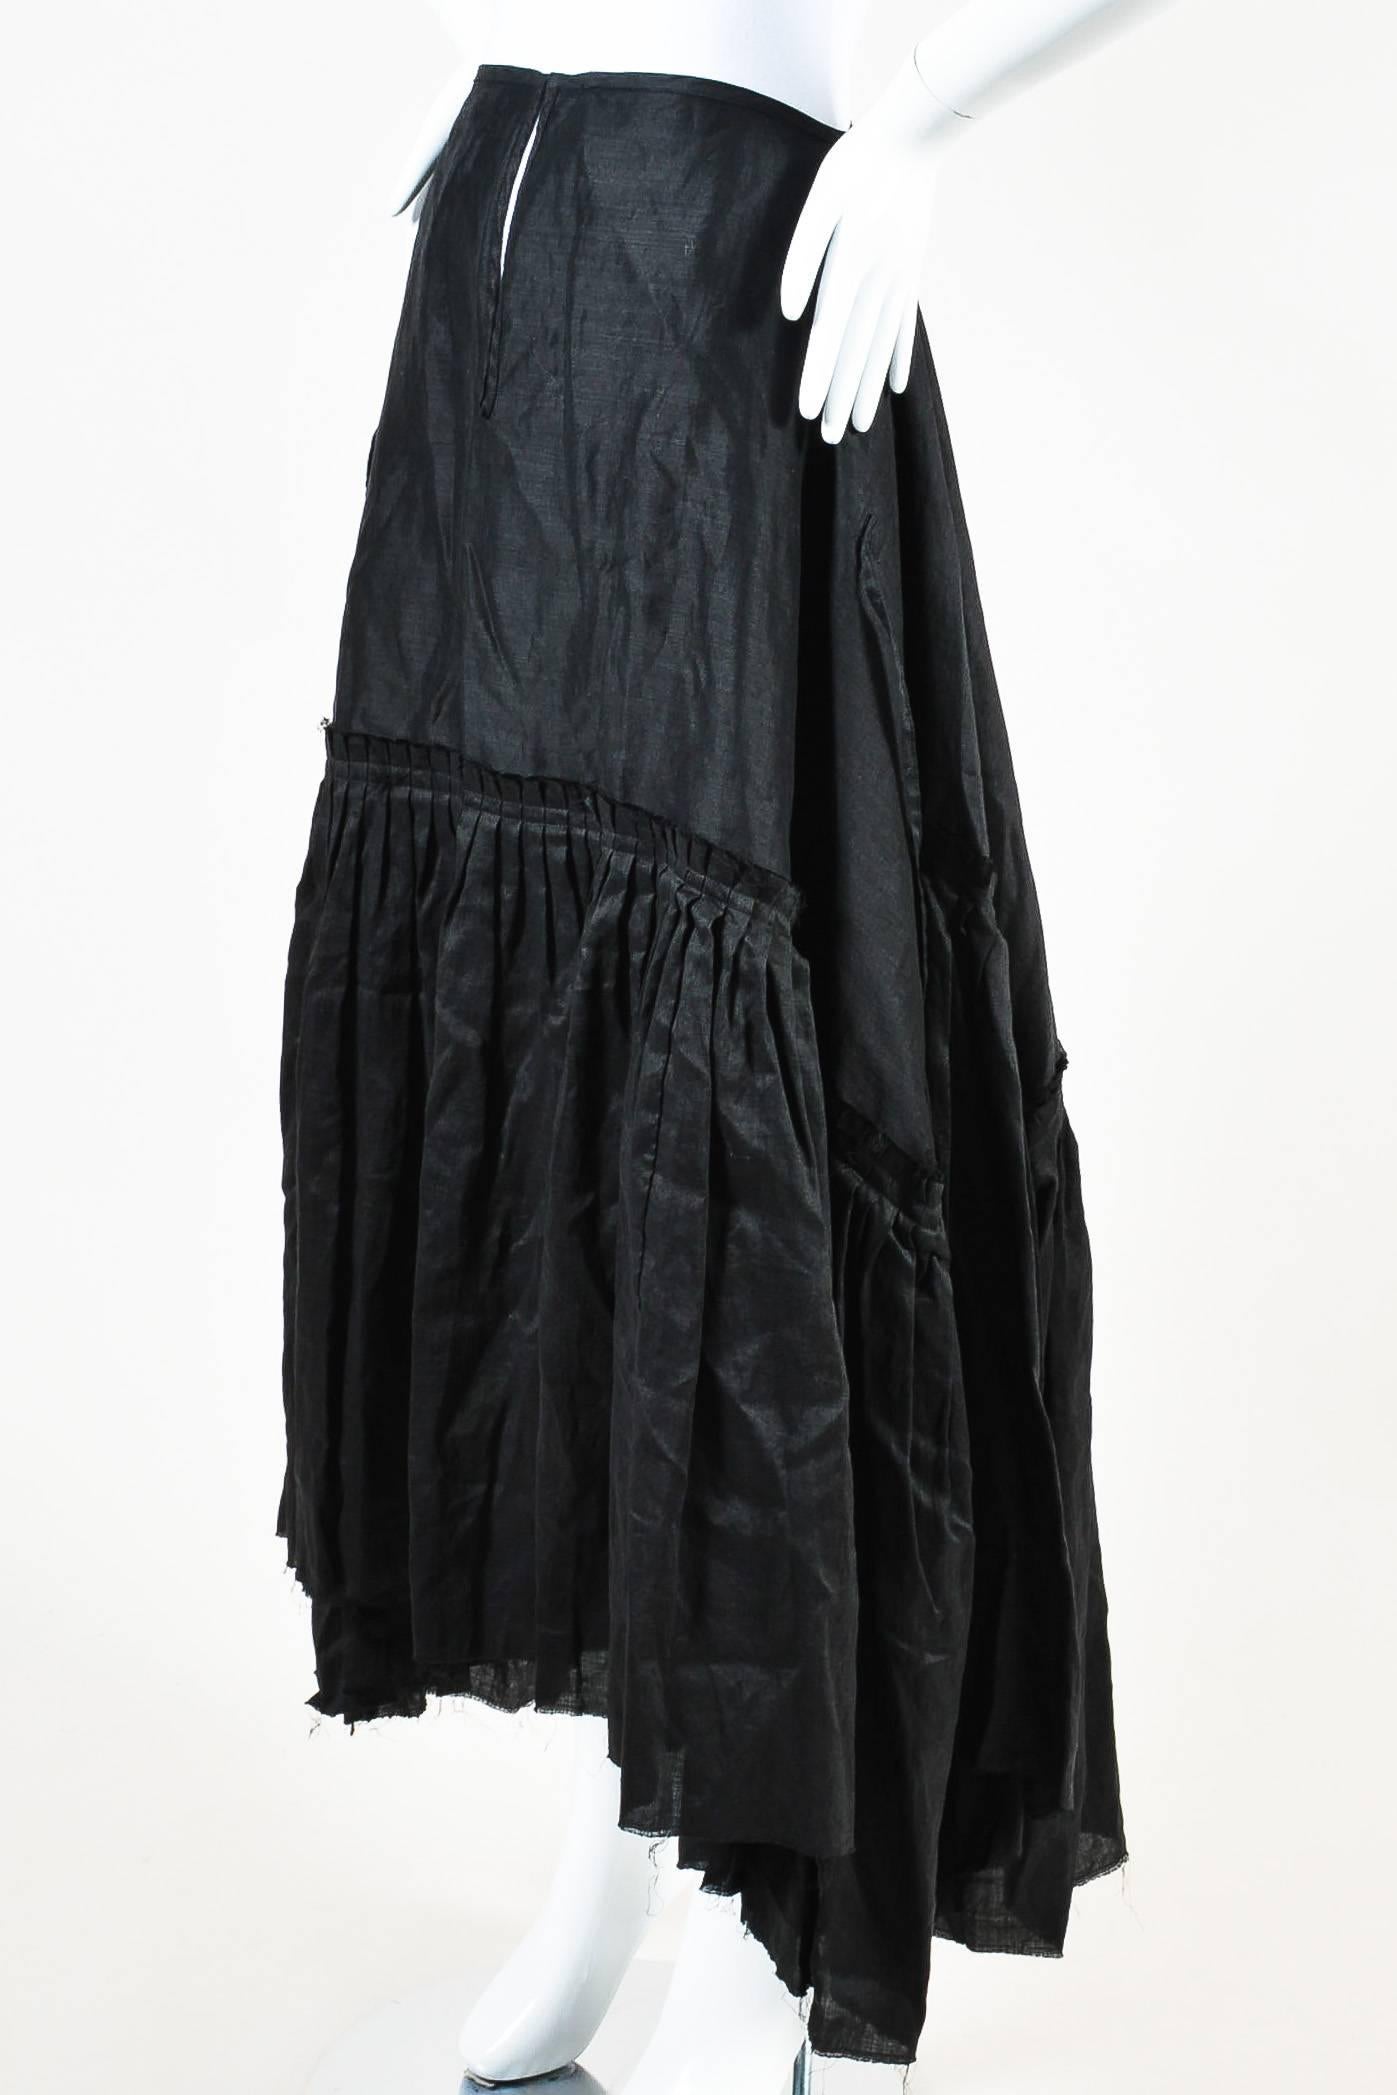 Retails for $965. Dramatic, avant garde skirt. Constructed of black linen. Attached strap details can be tied. Voluminous, tiered pleating with intentionally frayed edges.  Front hook and eye closure with long slit. Unlined. Comes with original tags